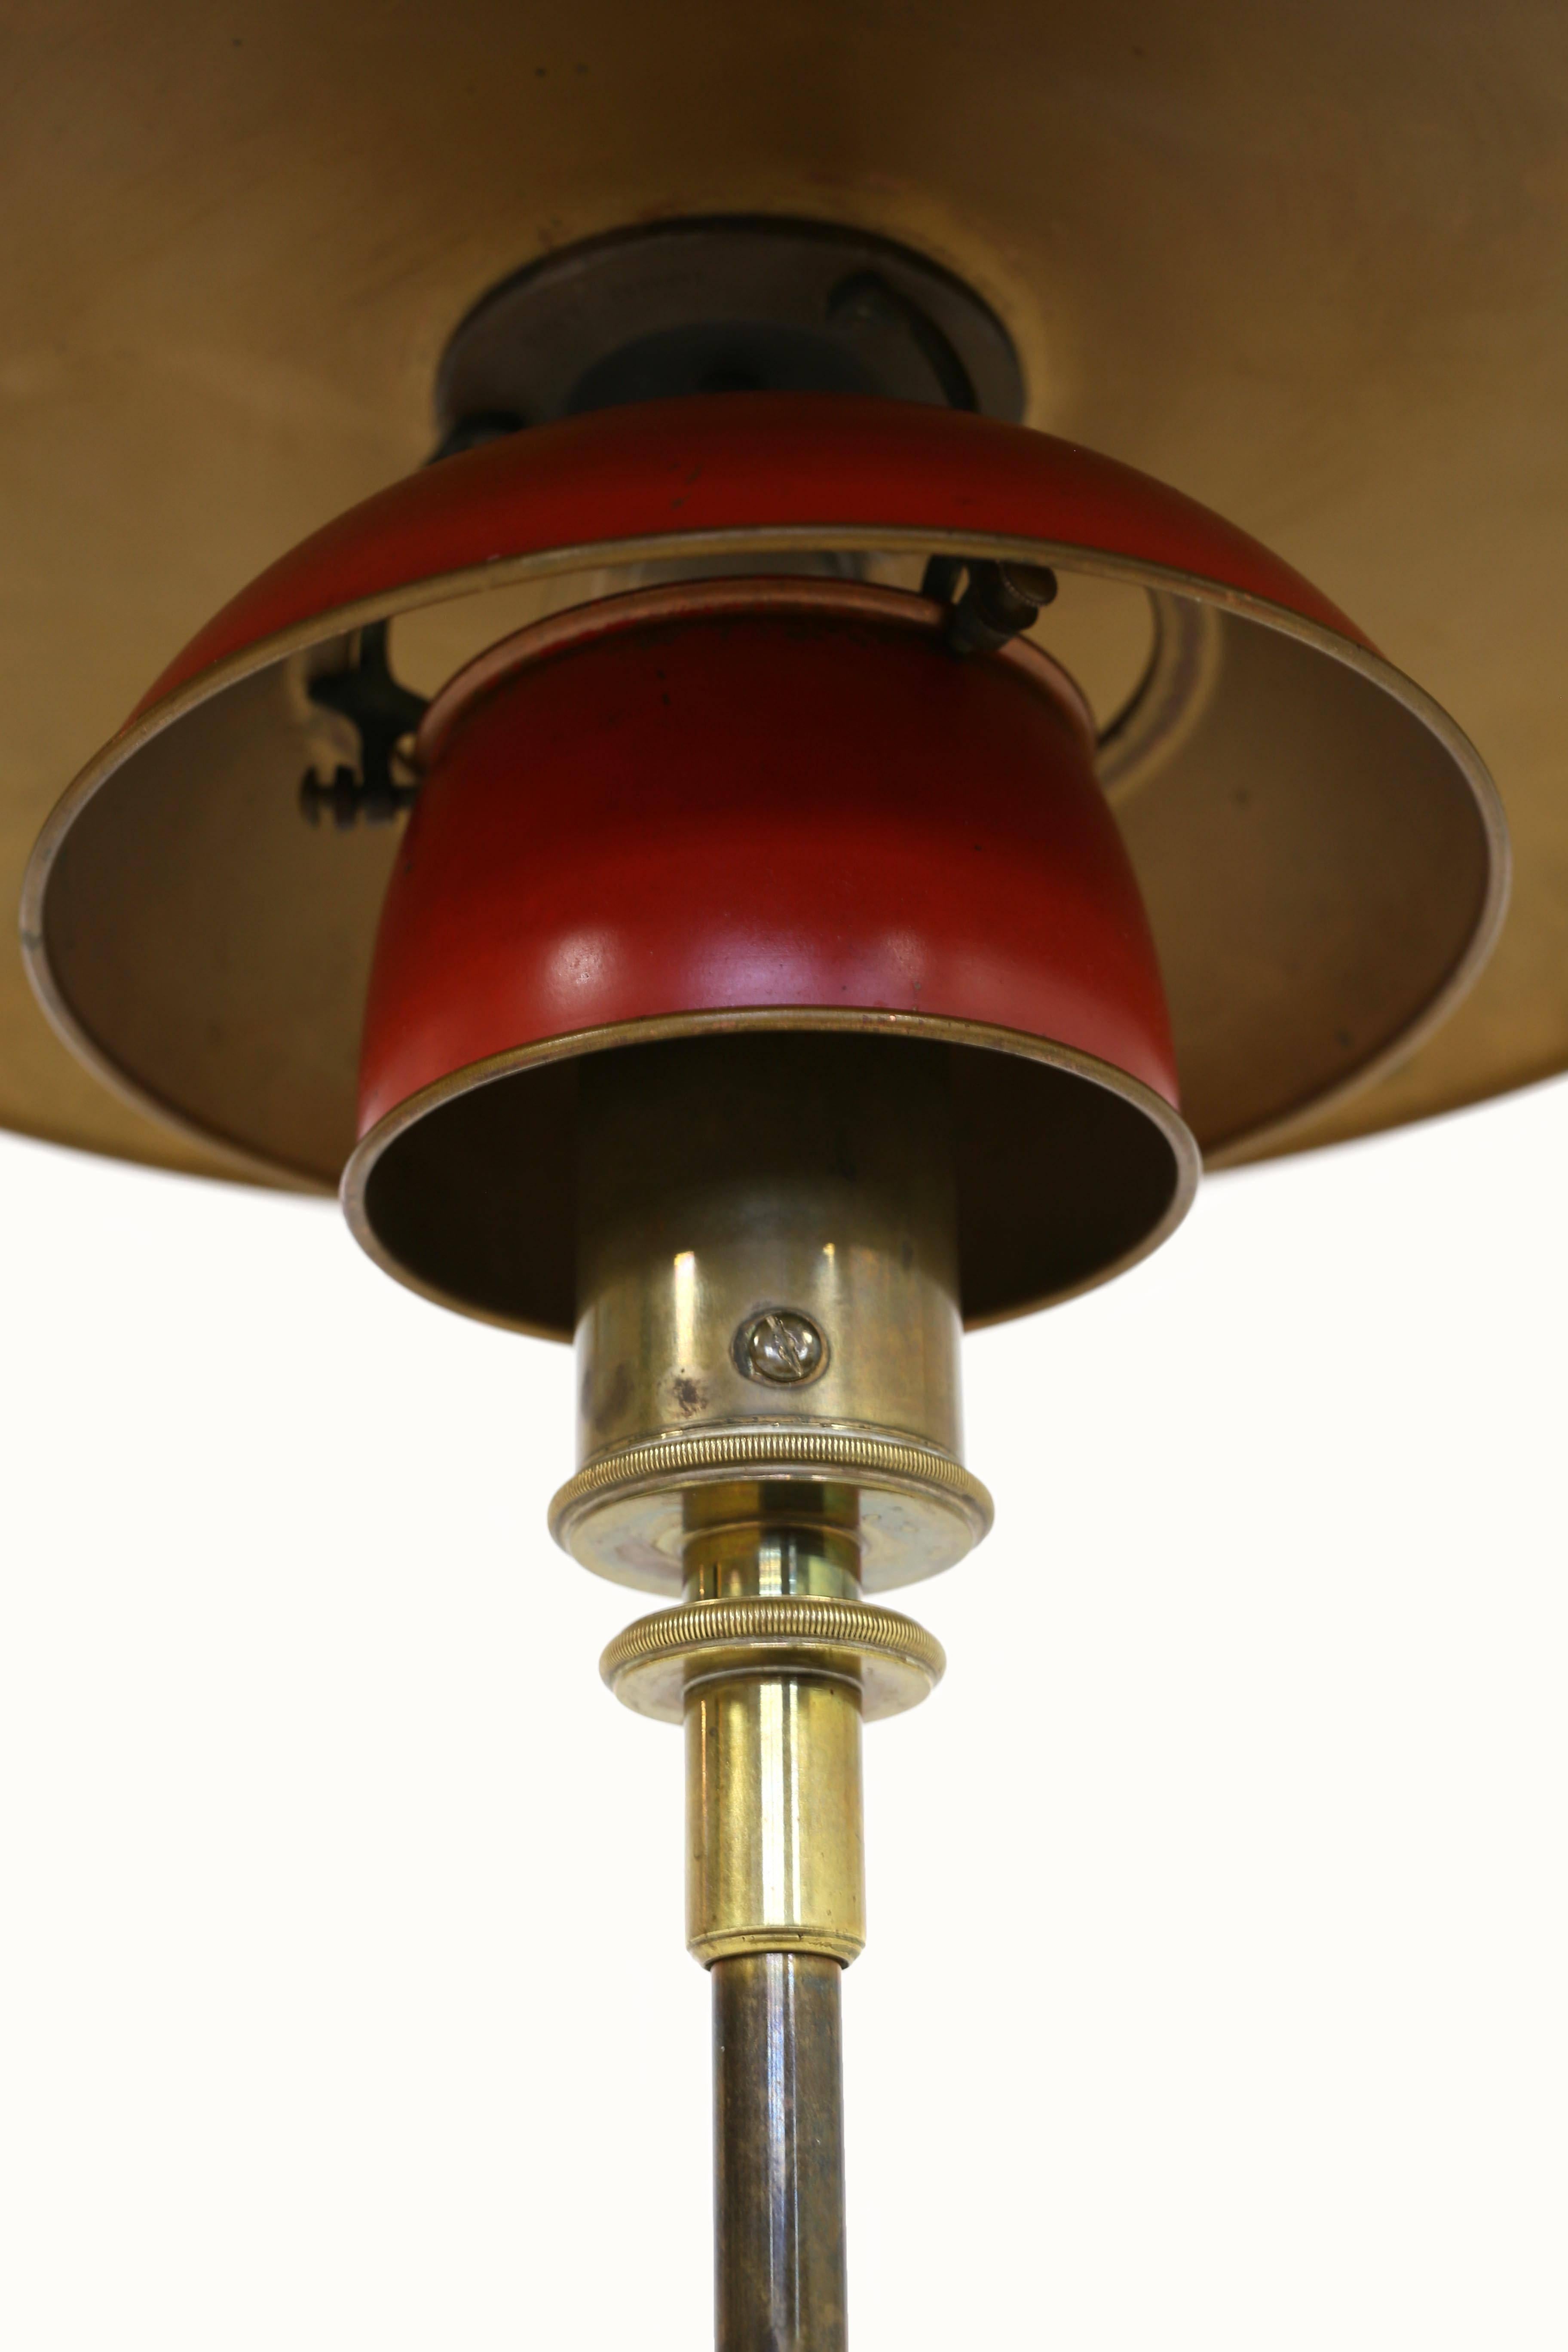 Early and rare Poul Henningsen 4/3 table lamp. Designed 1927 and made at Louis Poulsen, Denmark, 1927-1928.

Brass and original red and bronze copper shades.

Marked 'Pat. Appl.'.